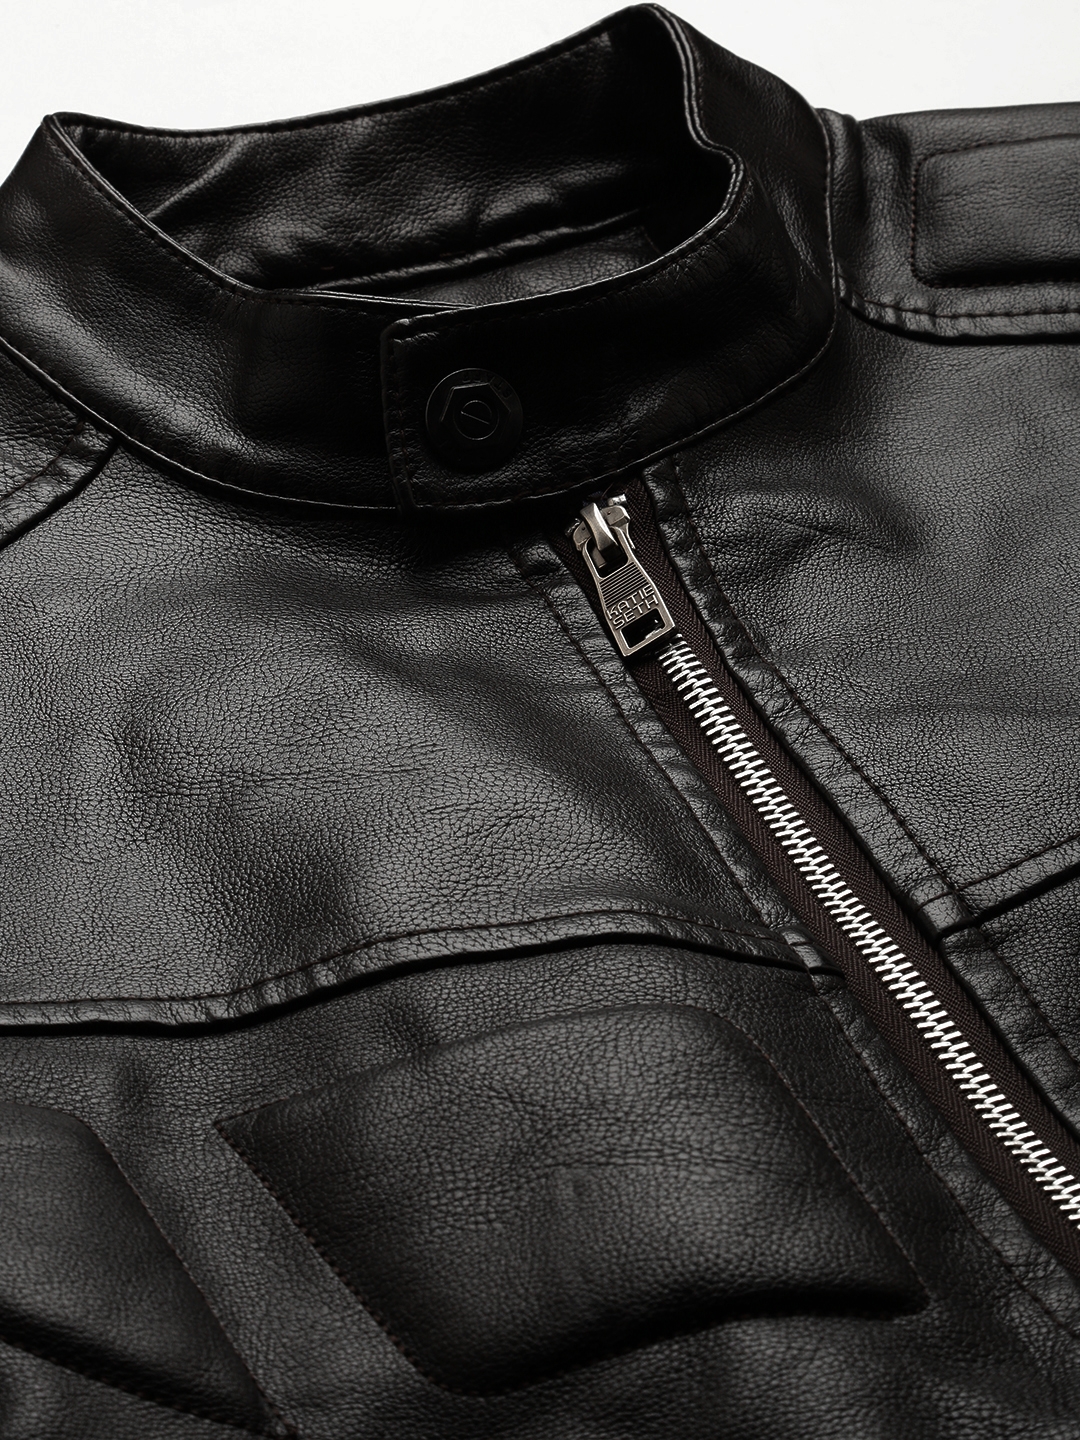 Men's Black Leather Solid Leather Jackets